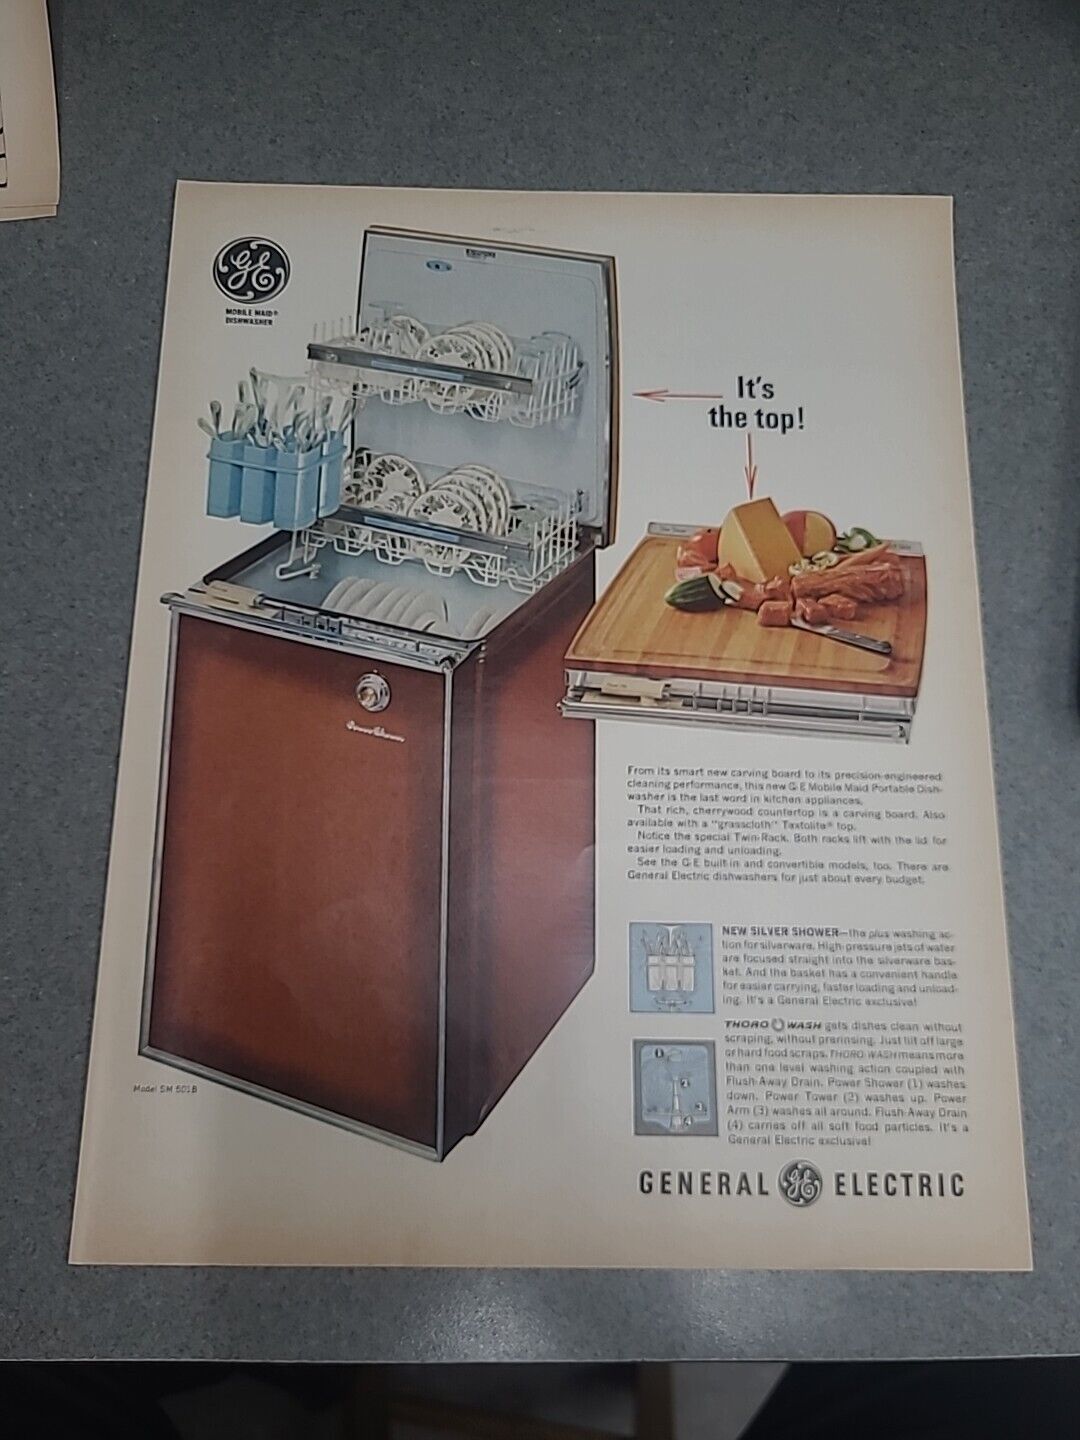 General Electric Mobile Paid Portable Dishwasher Vintage Print Ad 1966 10x13 